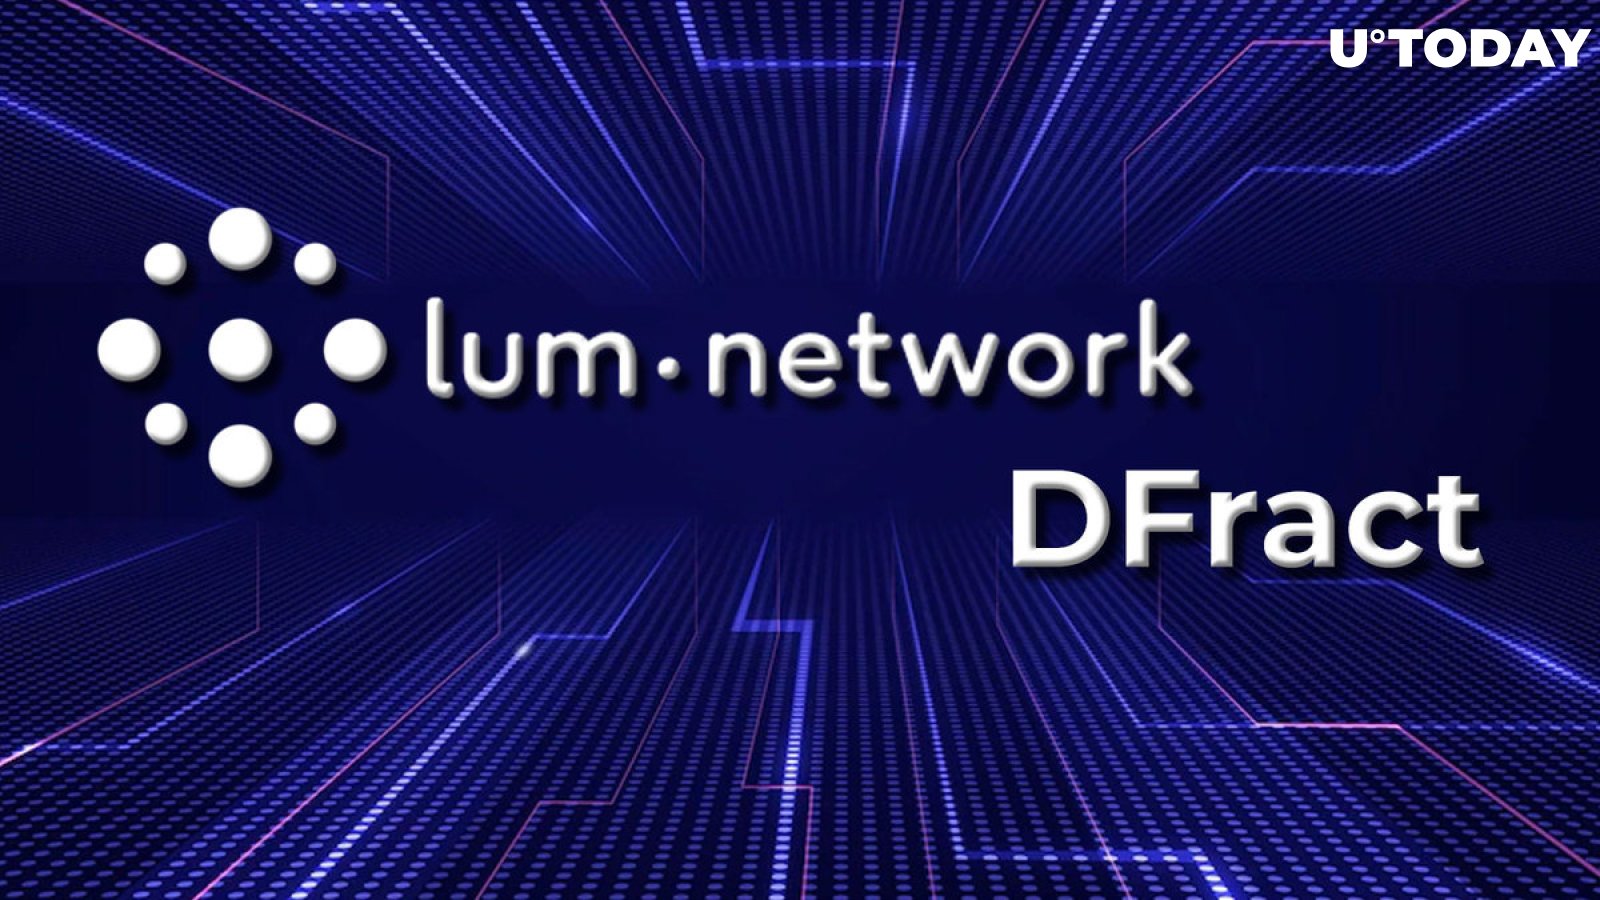 Lum Network Presents DFract: First Crypto Index for Cosmos Ecosystem